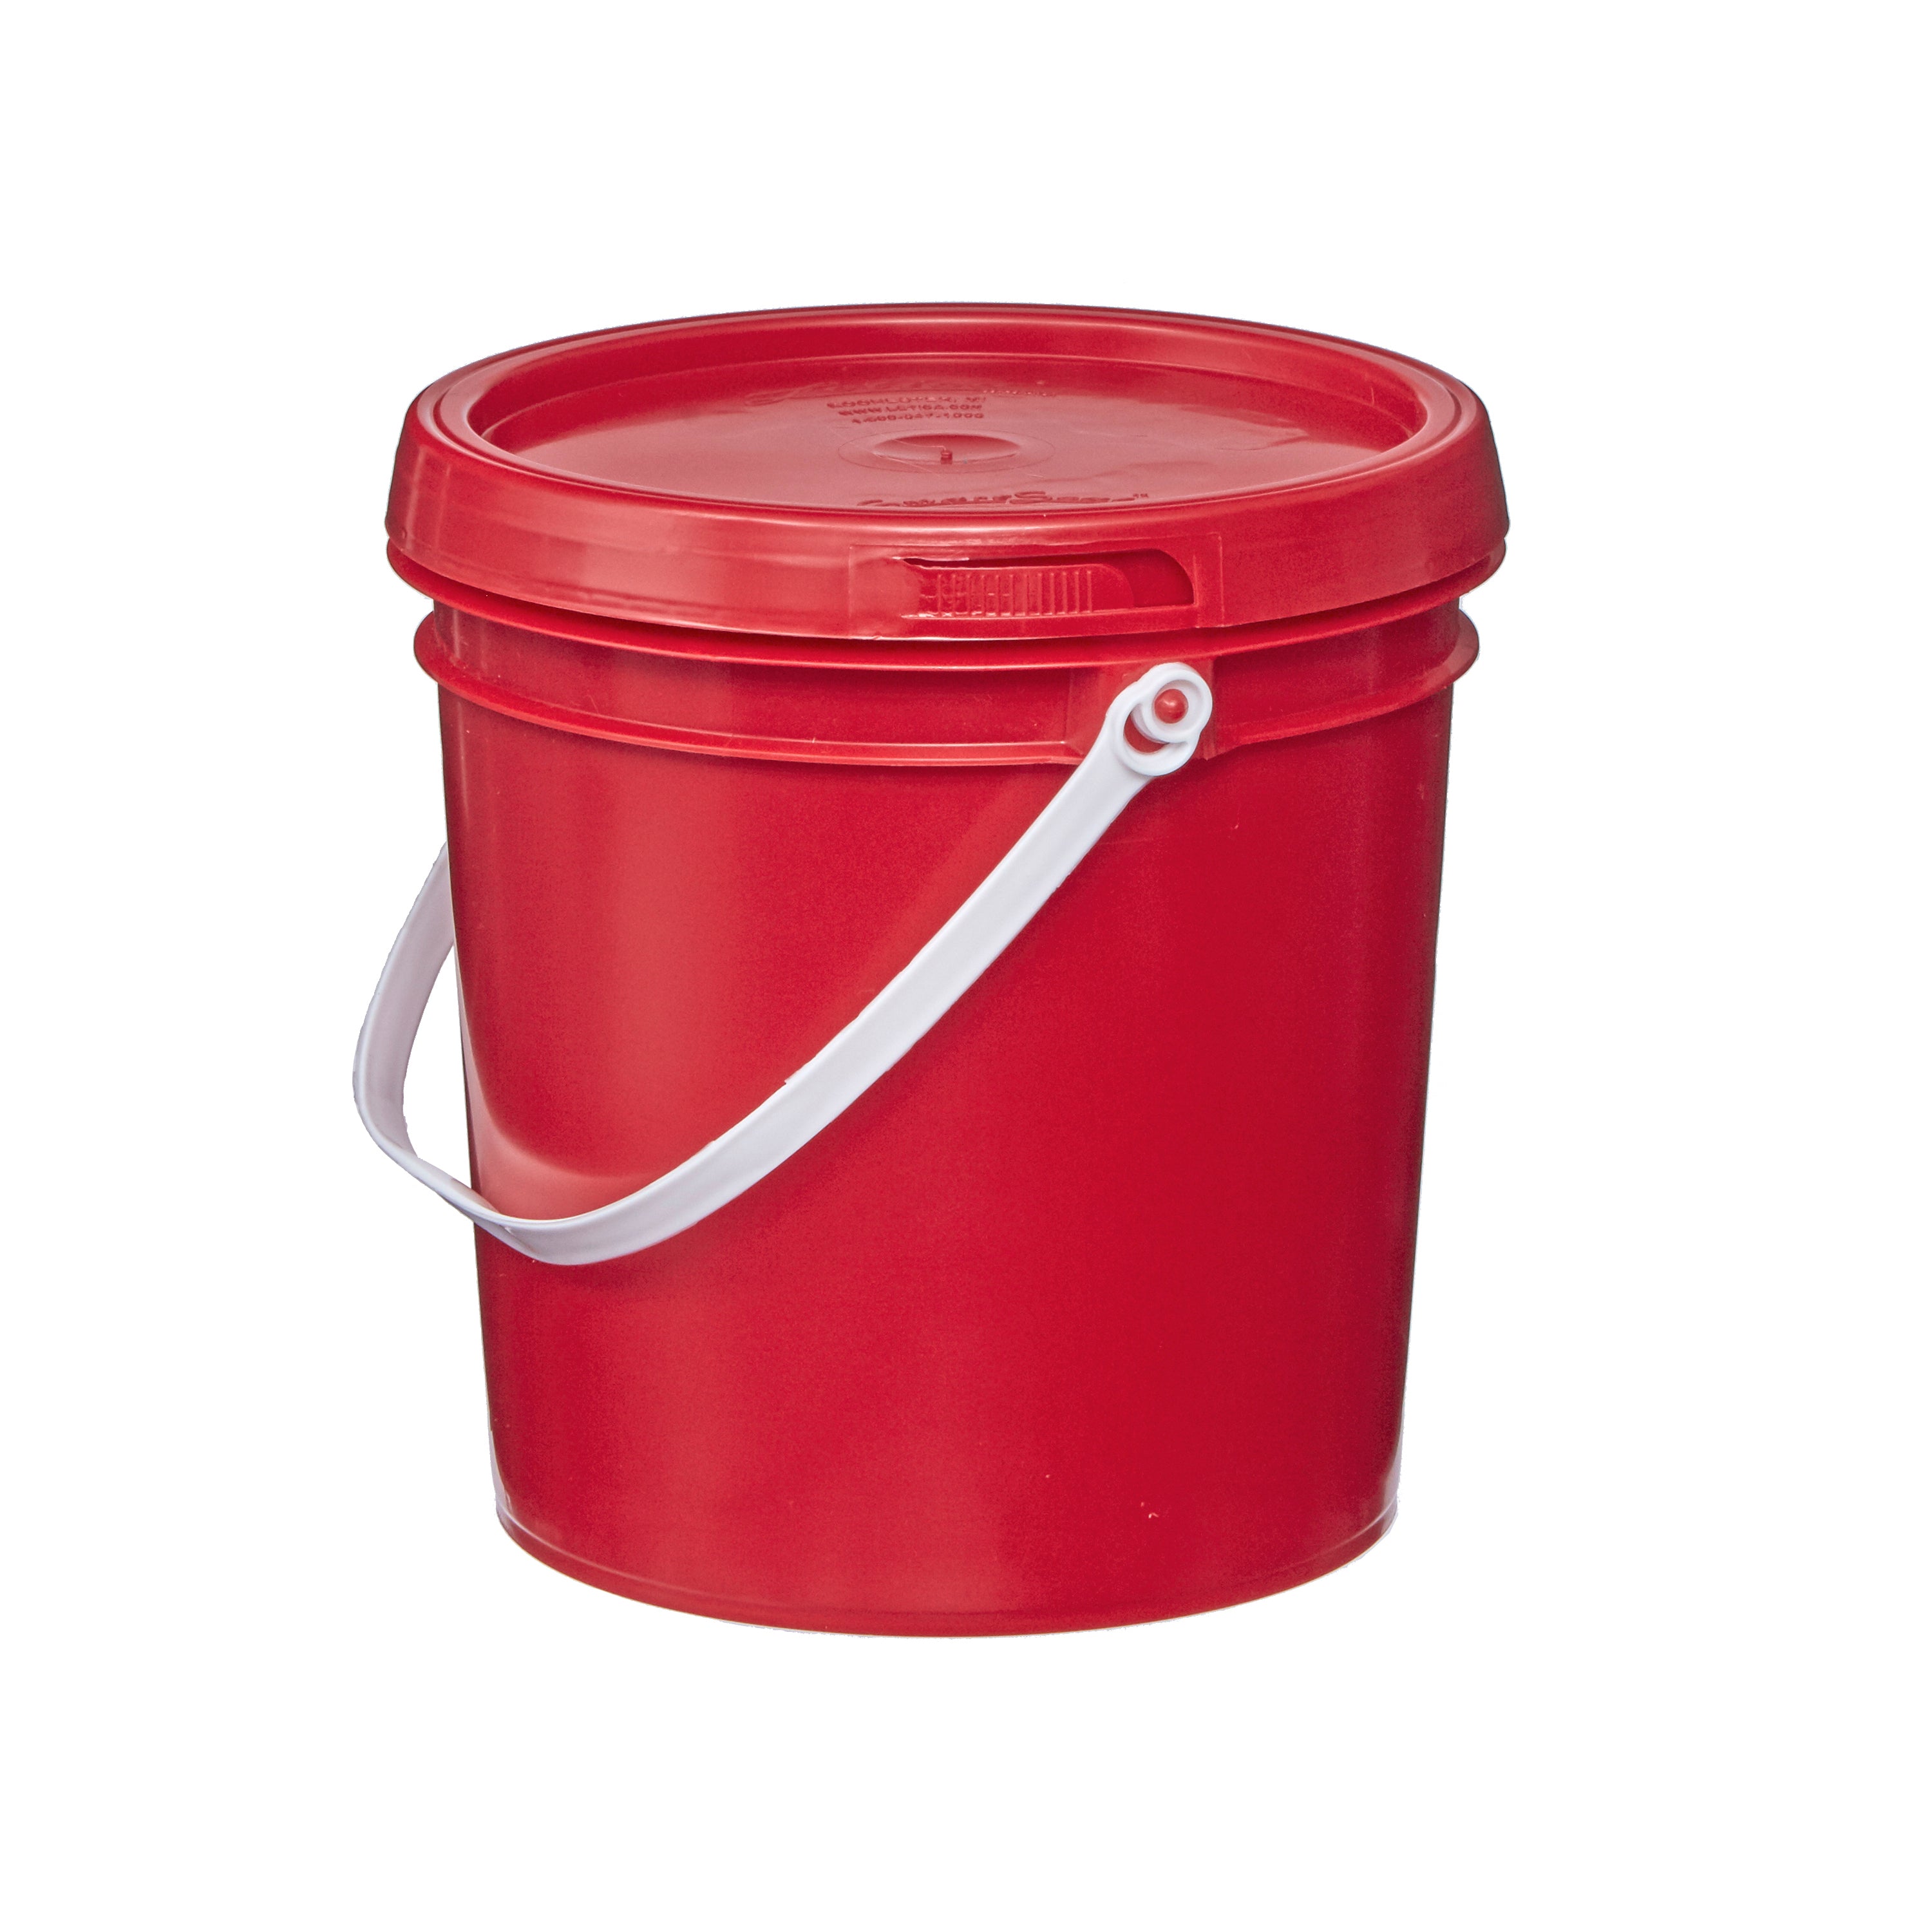 Small red bucket with lid red paint bucket